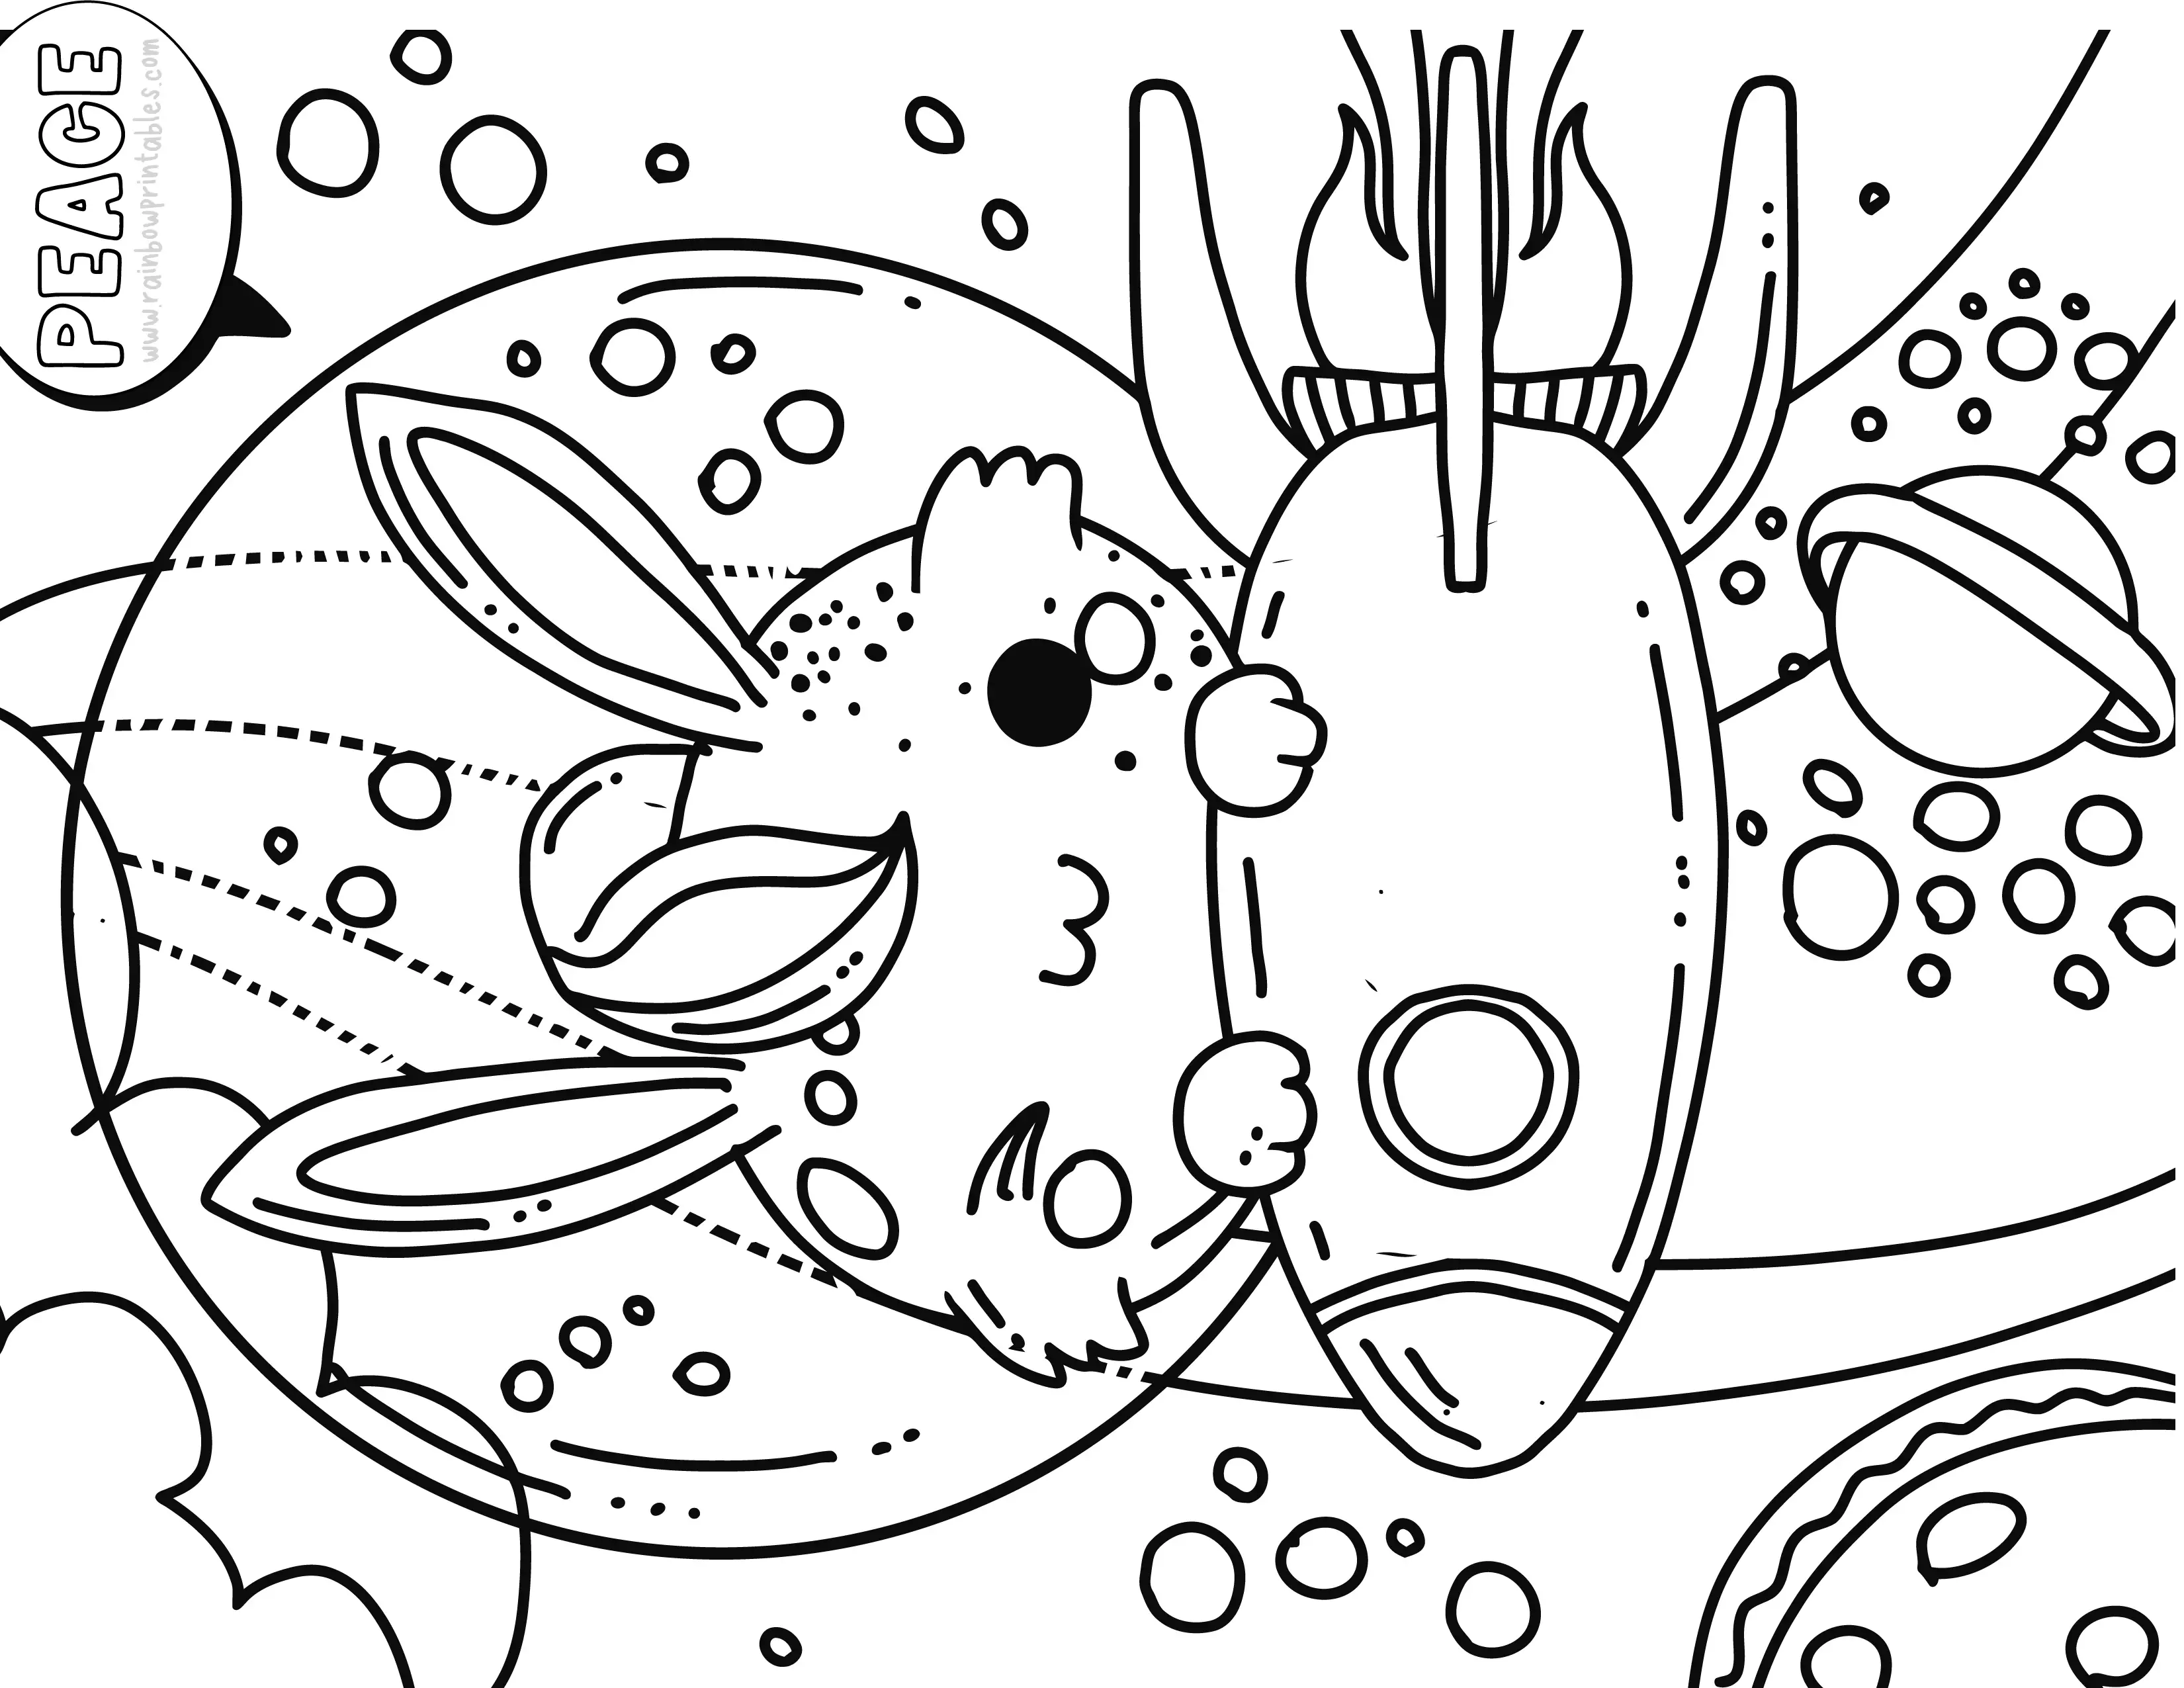 Peace Out Rabbit in Rocketship Space Galaxy Planet Outer space Moon Coloring Page